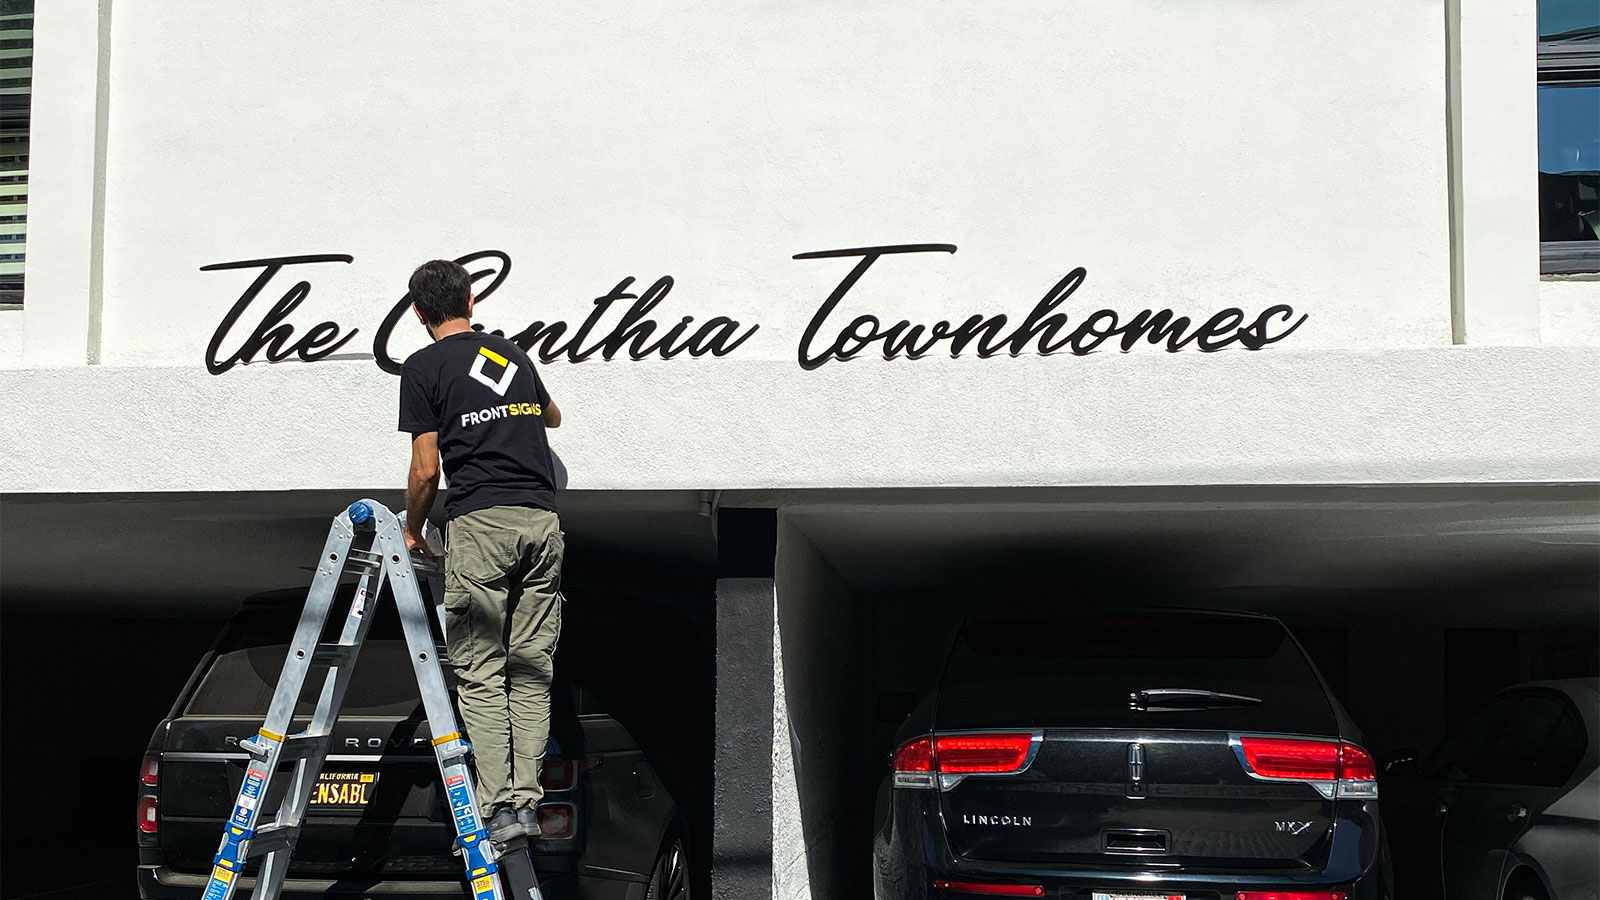 the cynthia townhomes 3d letters installation